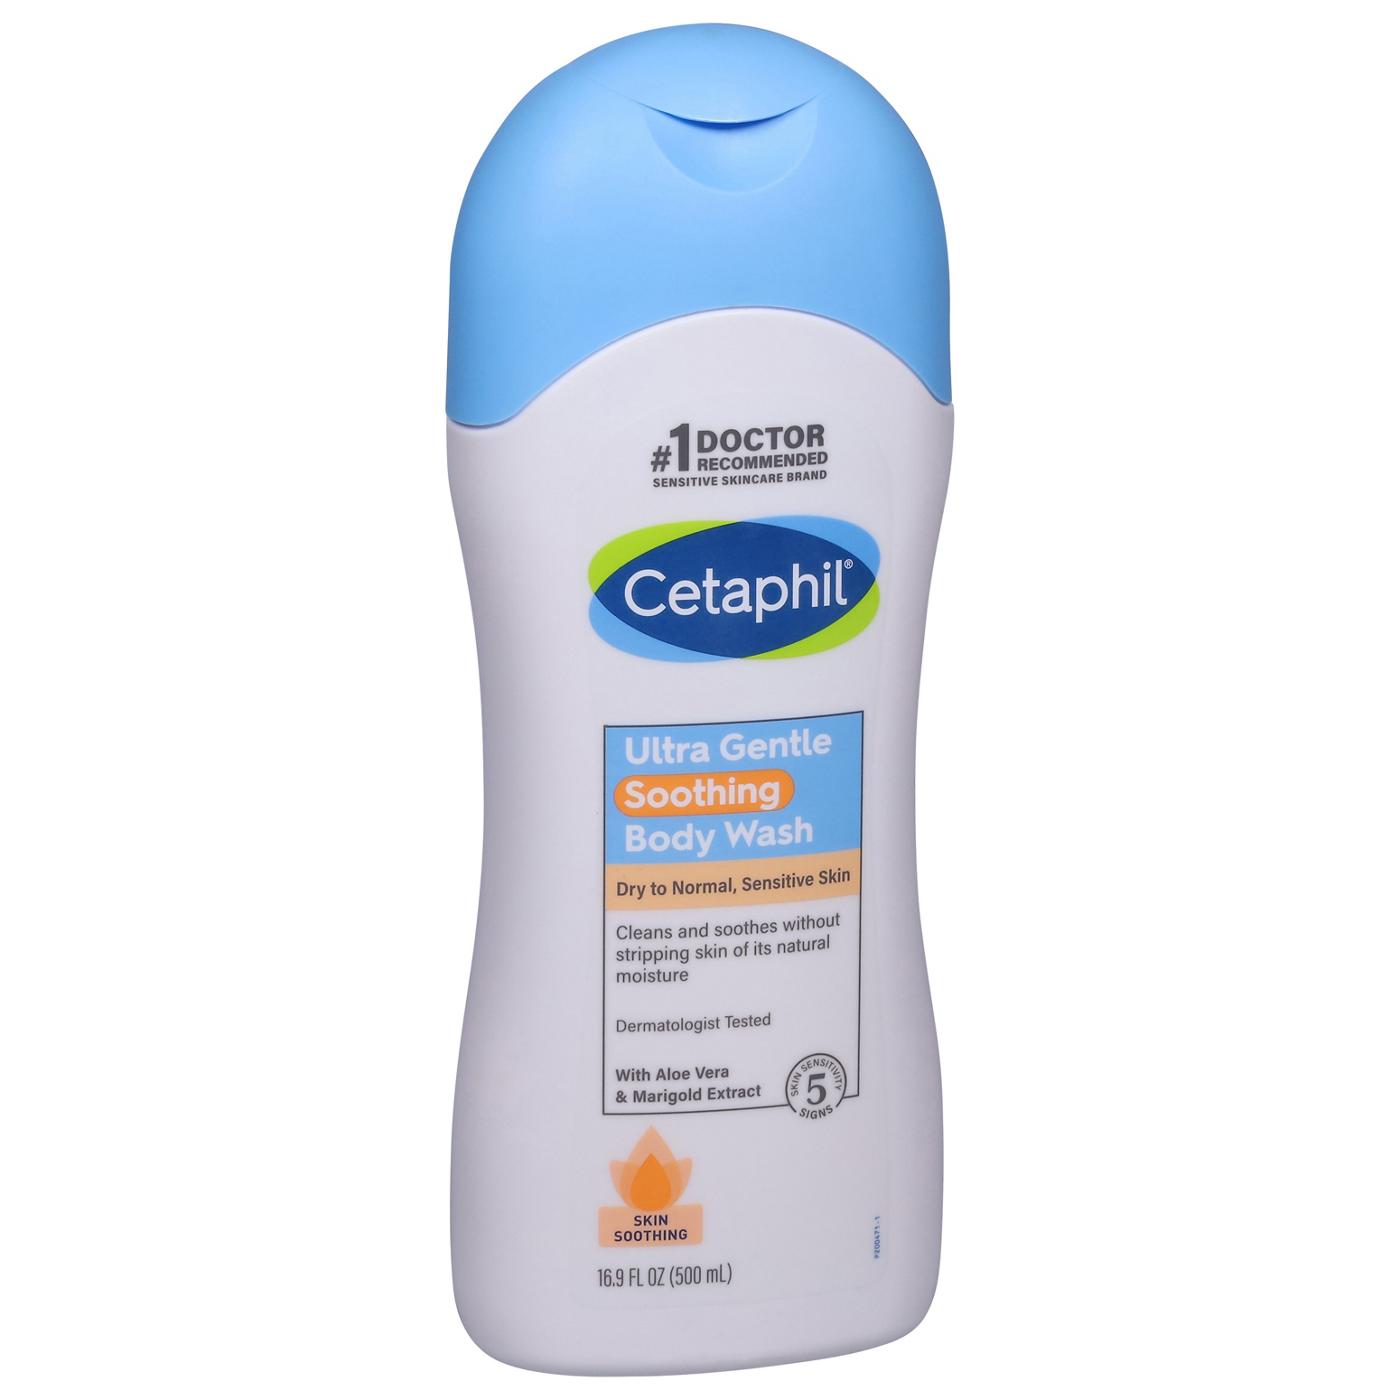 Cetaphil Ultra Gentle Soothing Body Wash; image 3 of 3